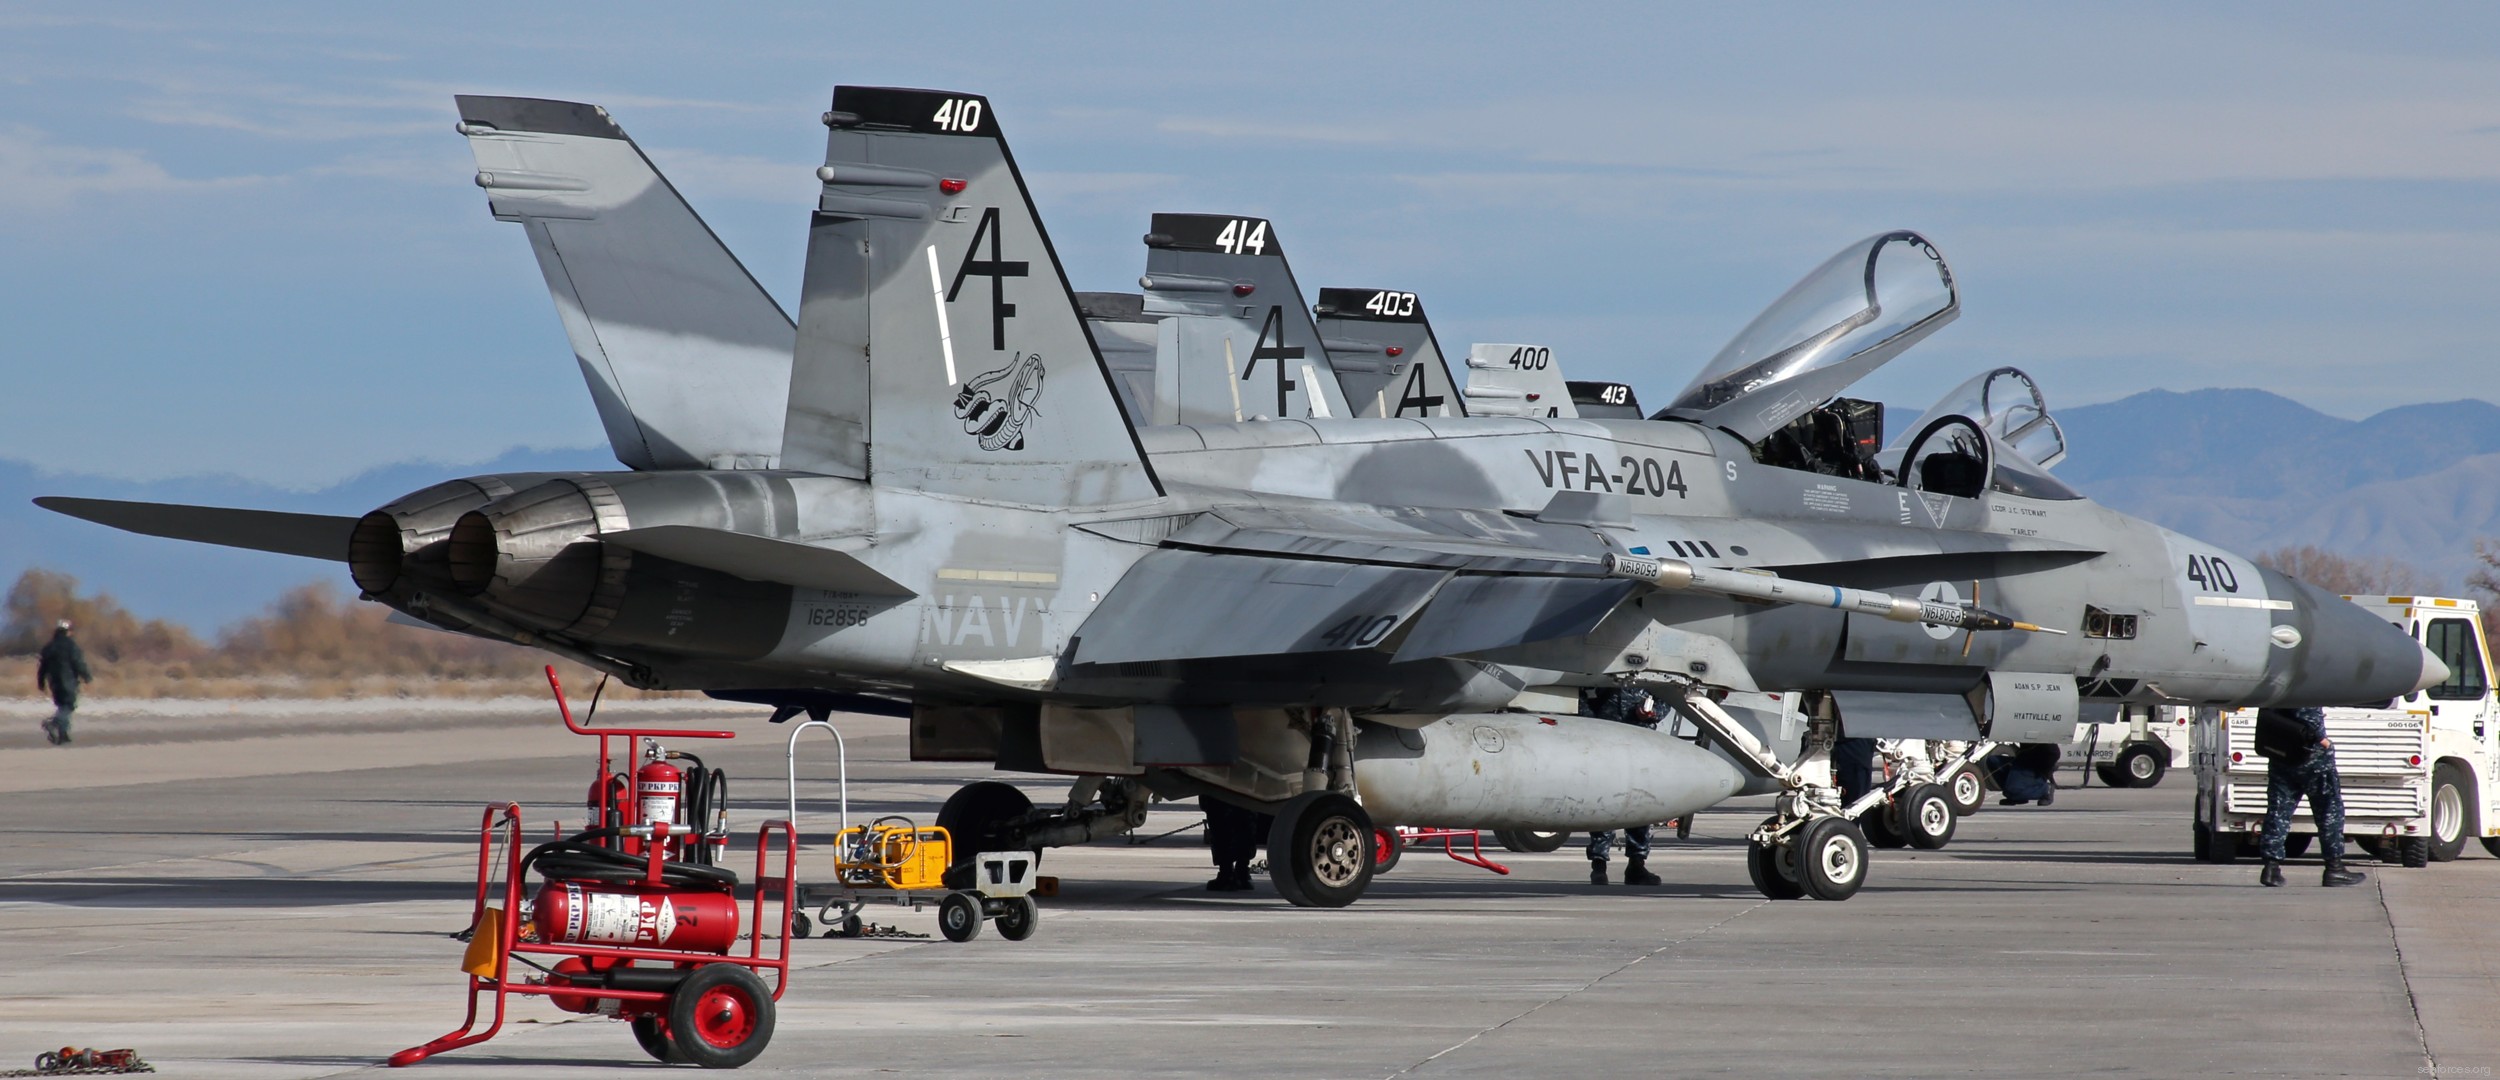 vfa-204 river rattlers f/a-18a+ hornet strike fighter squadron us navy reserve 23 nas fallon nevada